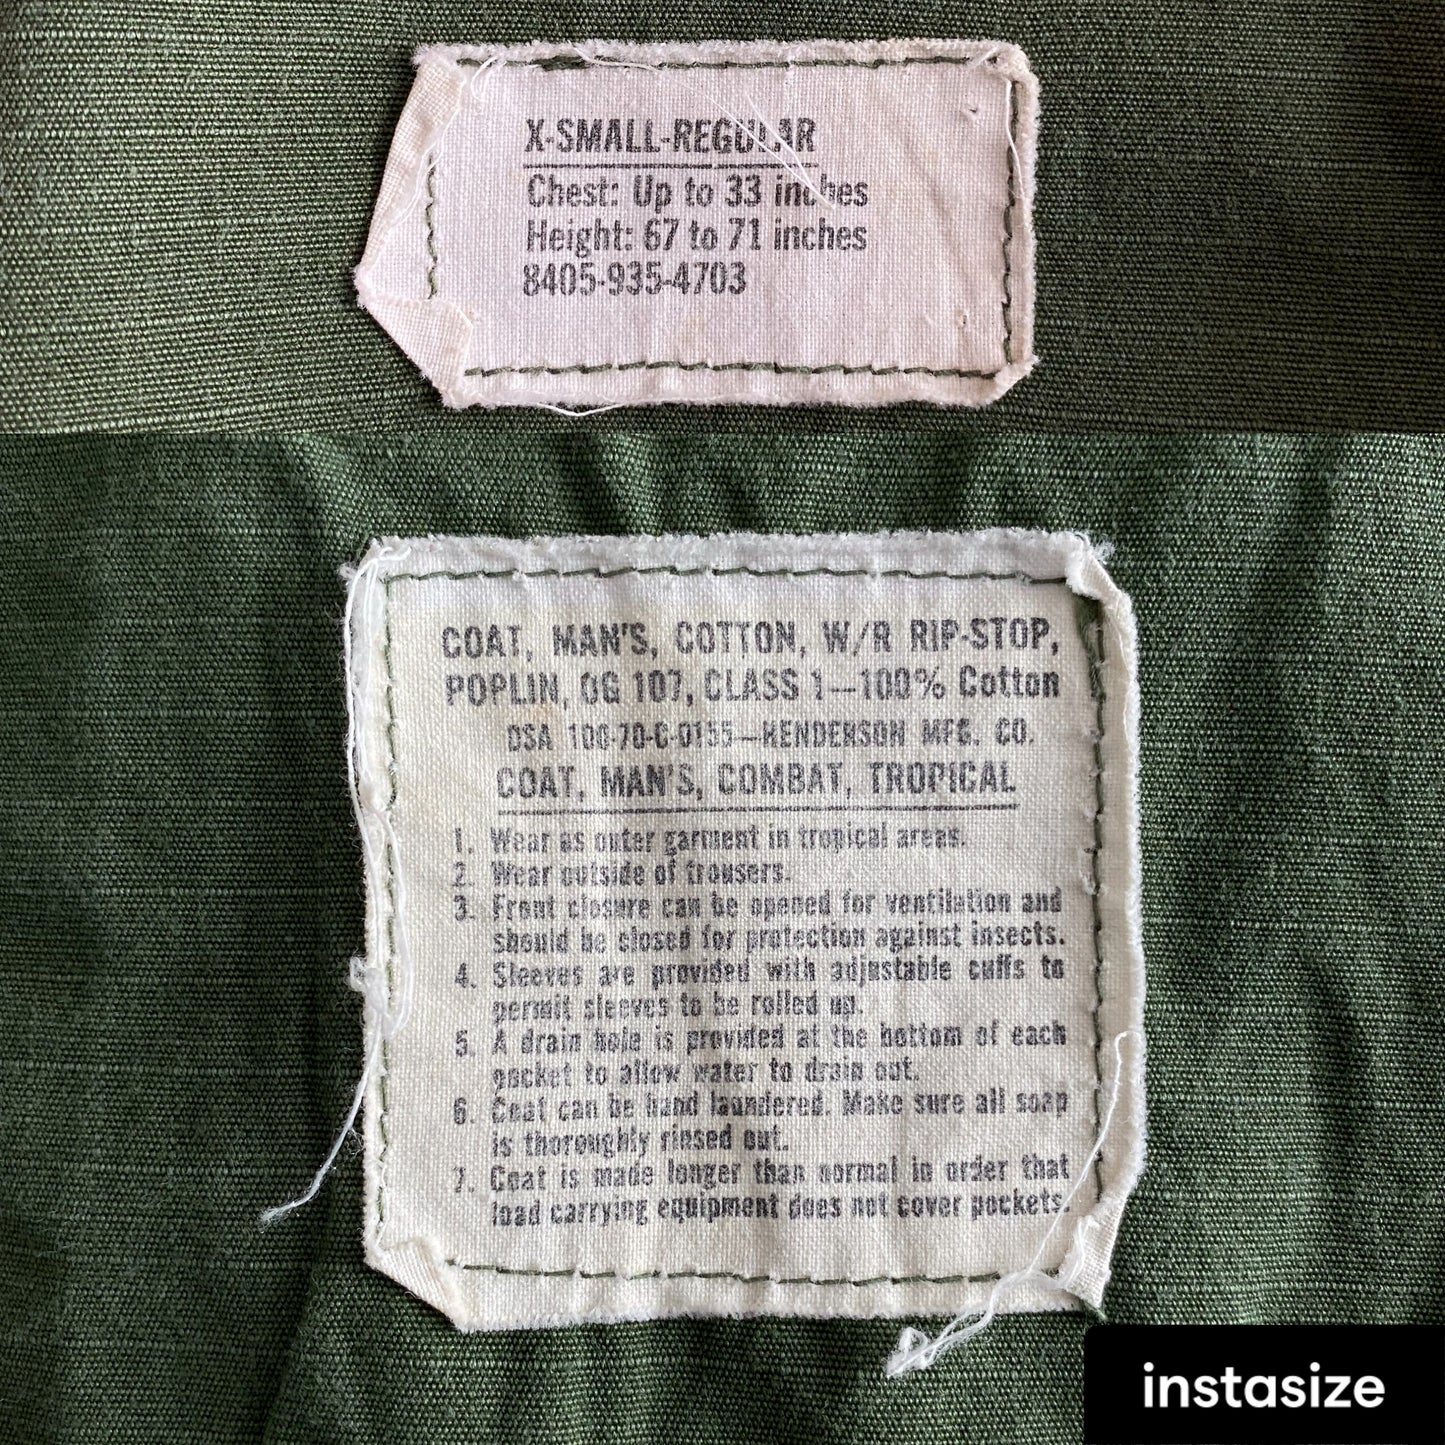 X Small. Authentic 1970 US Army Vintage tropical Vietnam  jungle jacket.